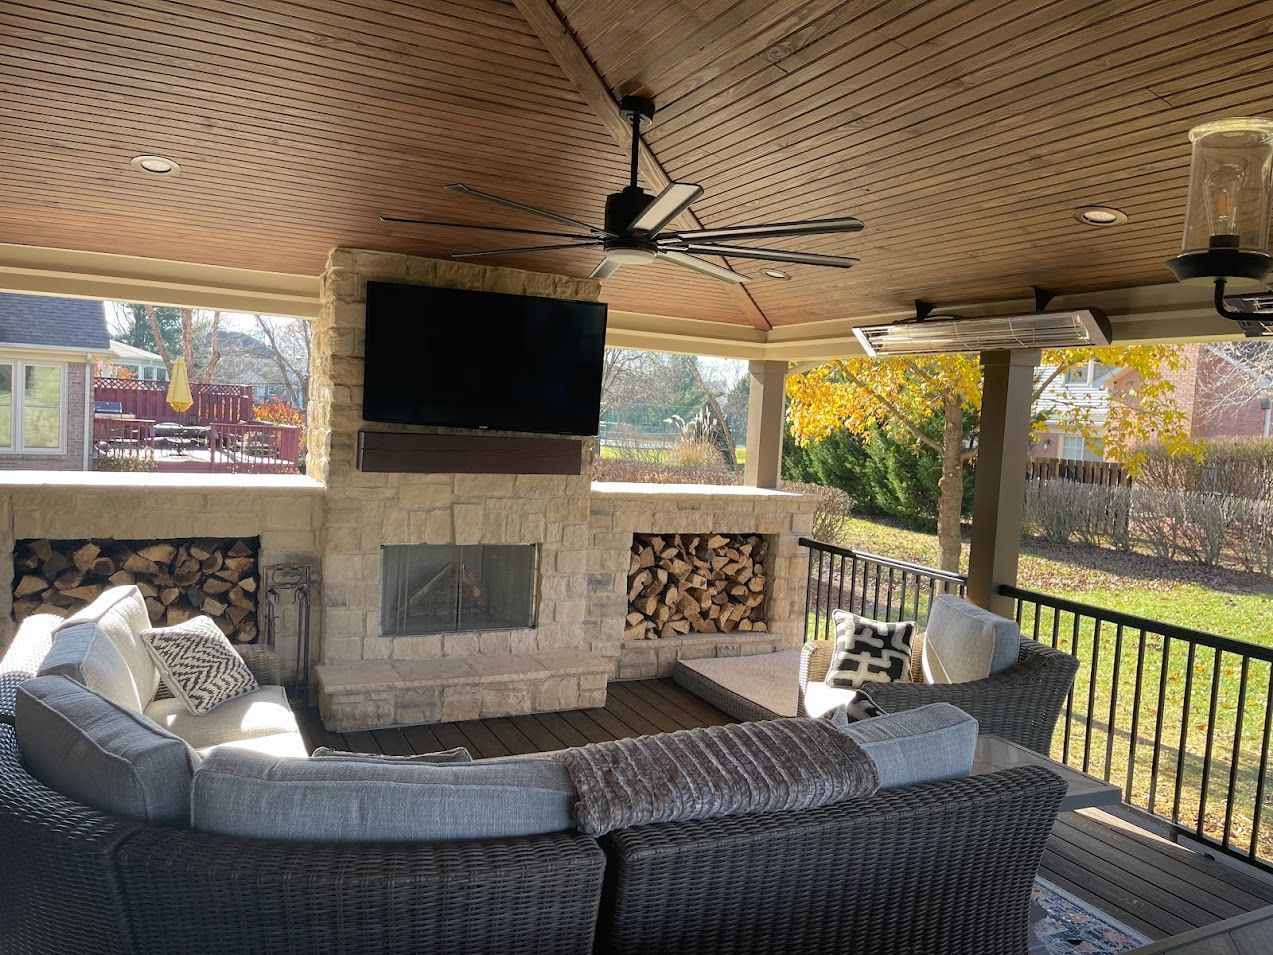 Maximize Your Summer Fun: Essential Outdoor Living Upgrades by SB Home Renovations
